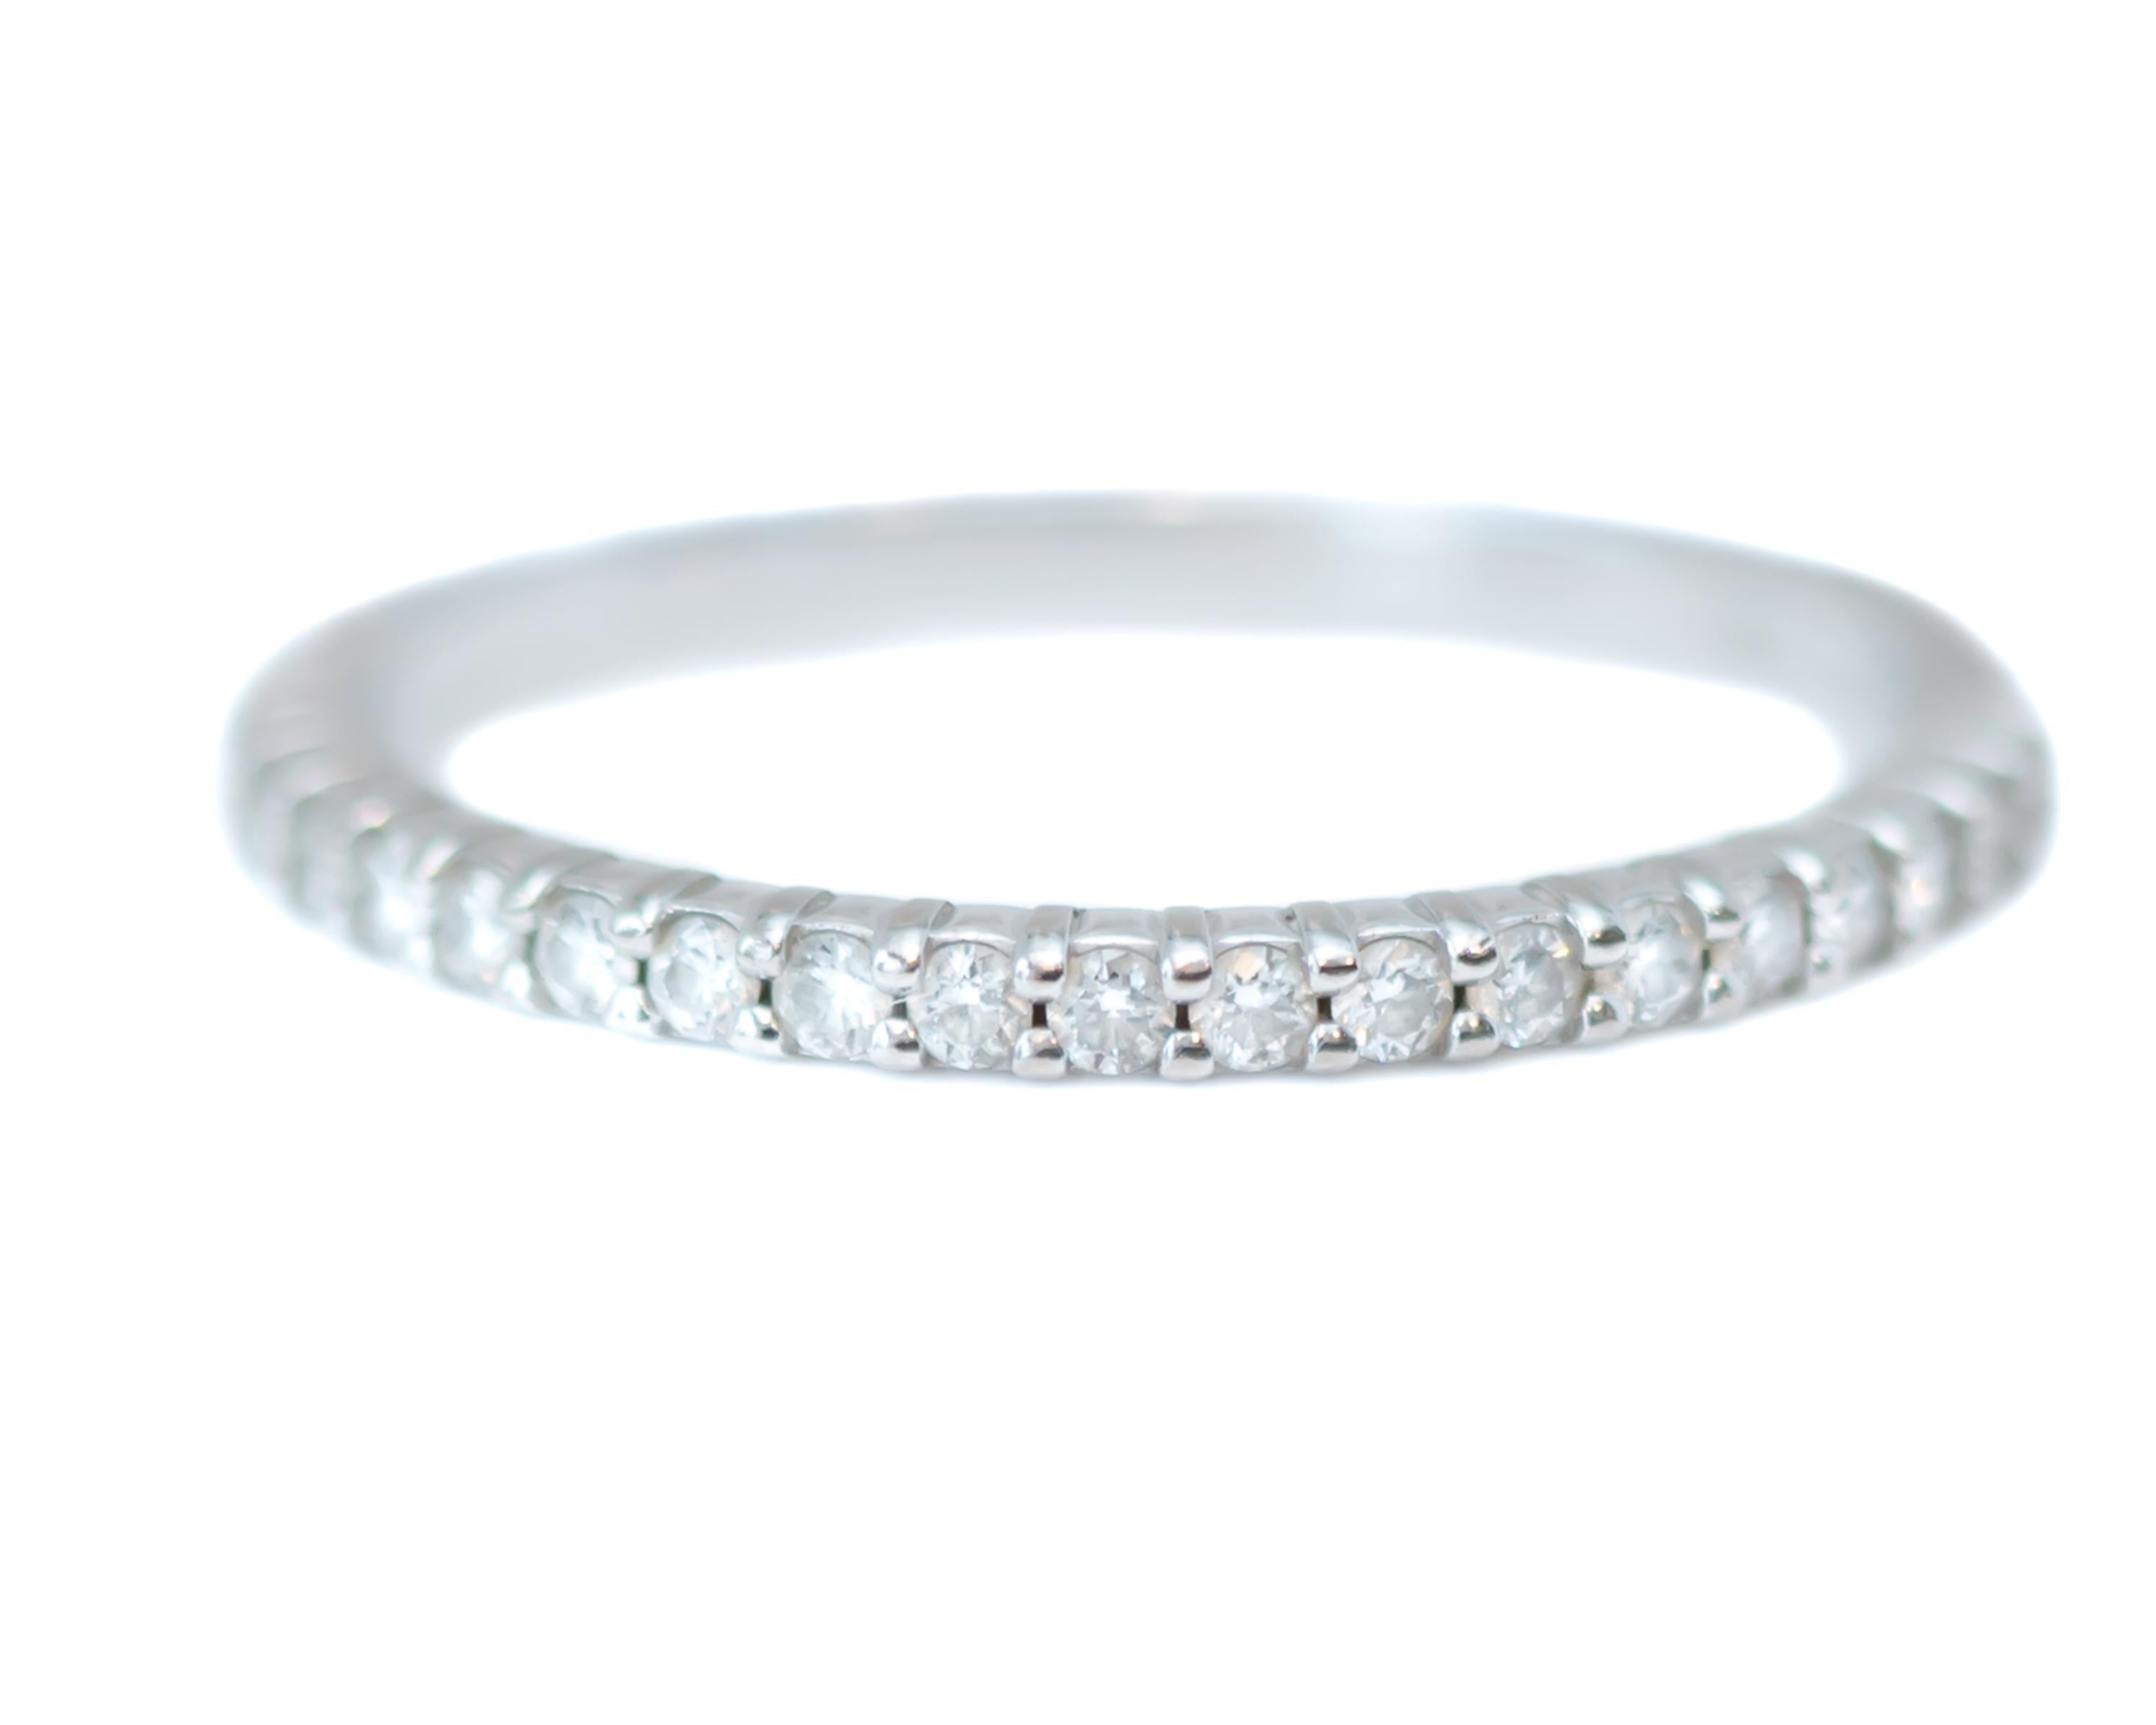 Diamond Eternity Band - 18 Karat White Gold, Diamonds

Features:
0.40 carat total Precision cut set Diamonds
18 Karat White Gold
Band width measures 1.75 millimeters
Fits a size 6.25, can be resized

Ring Details:
Size: 6.25, can be resized
Width: